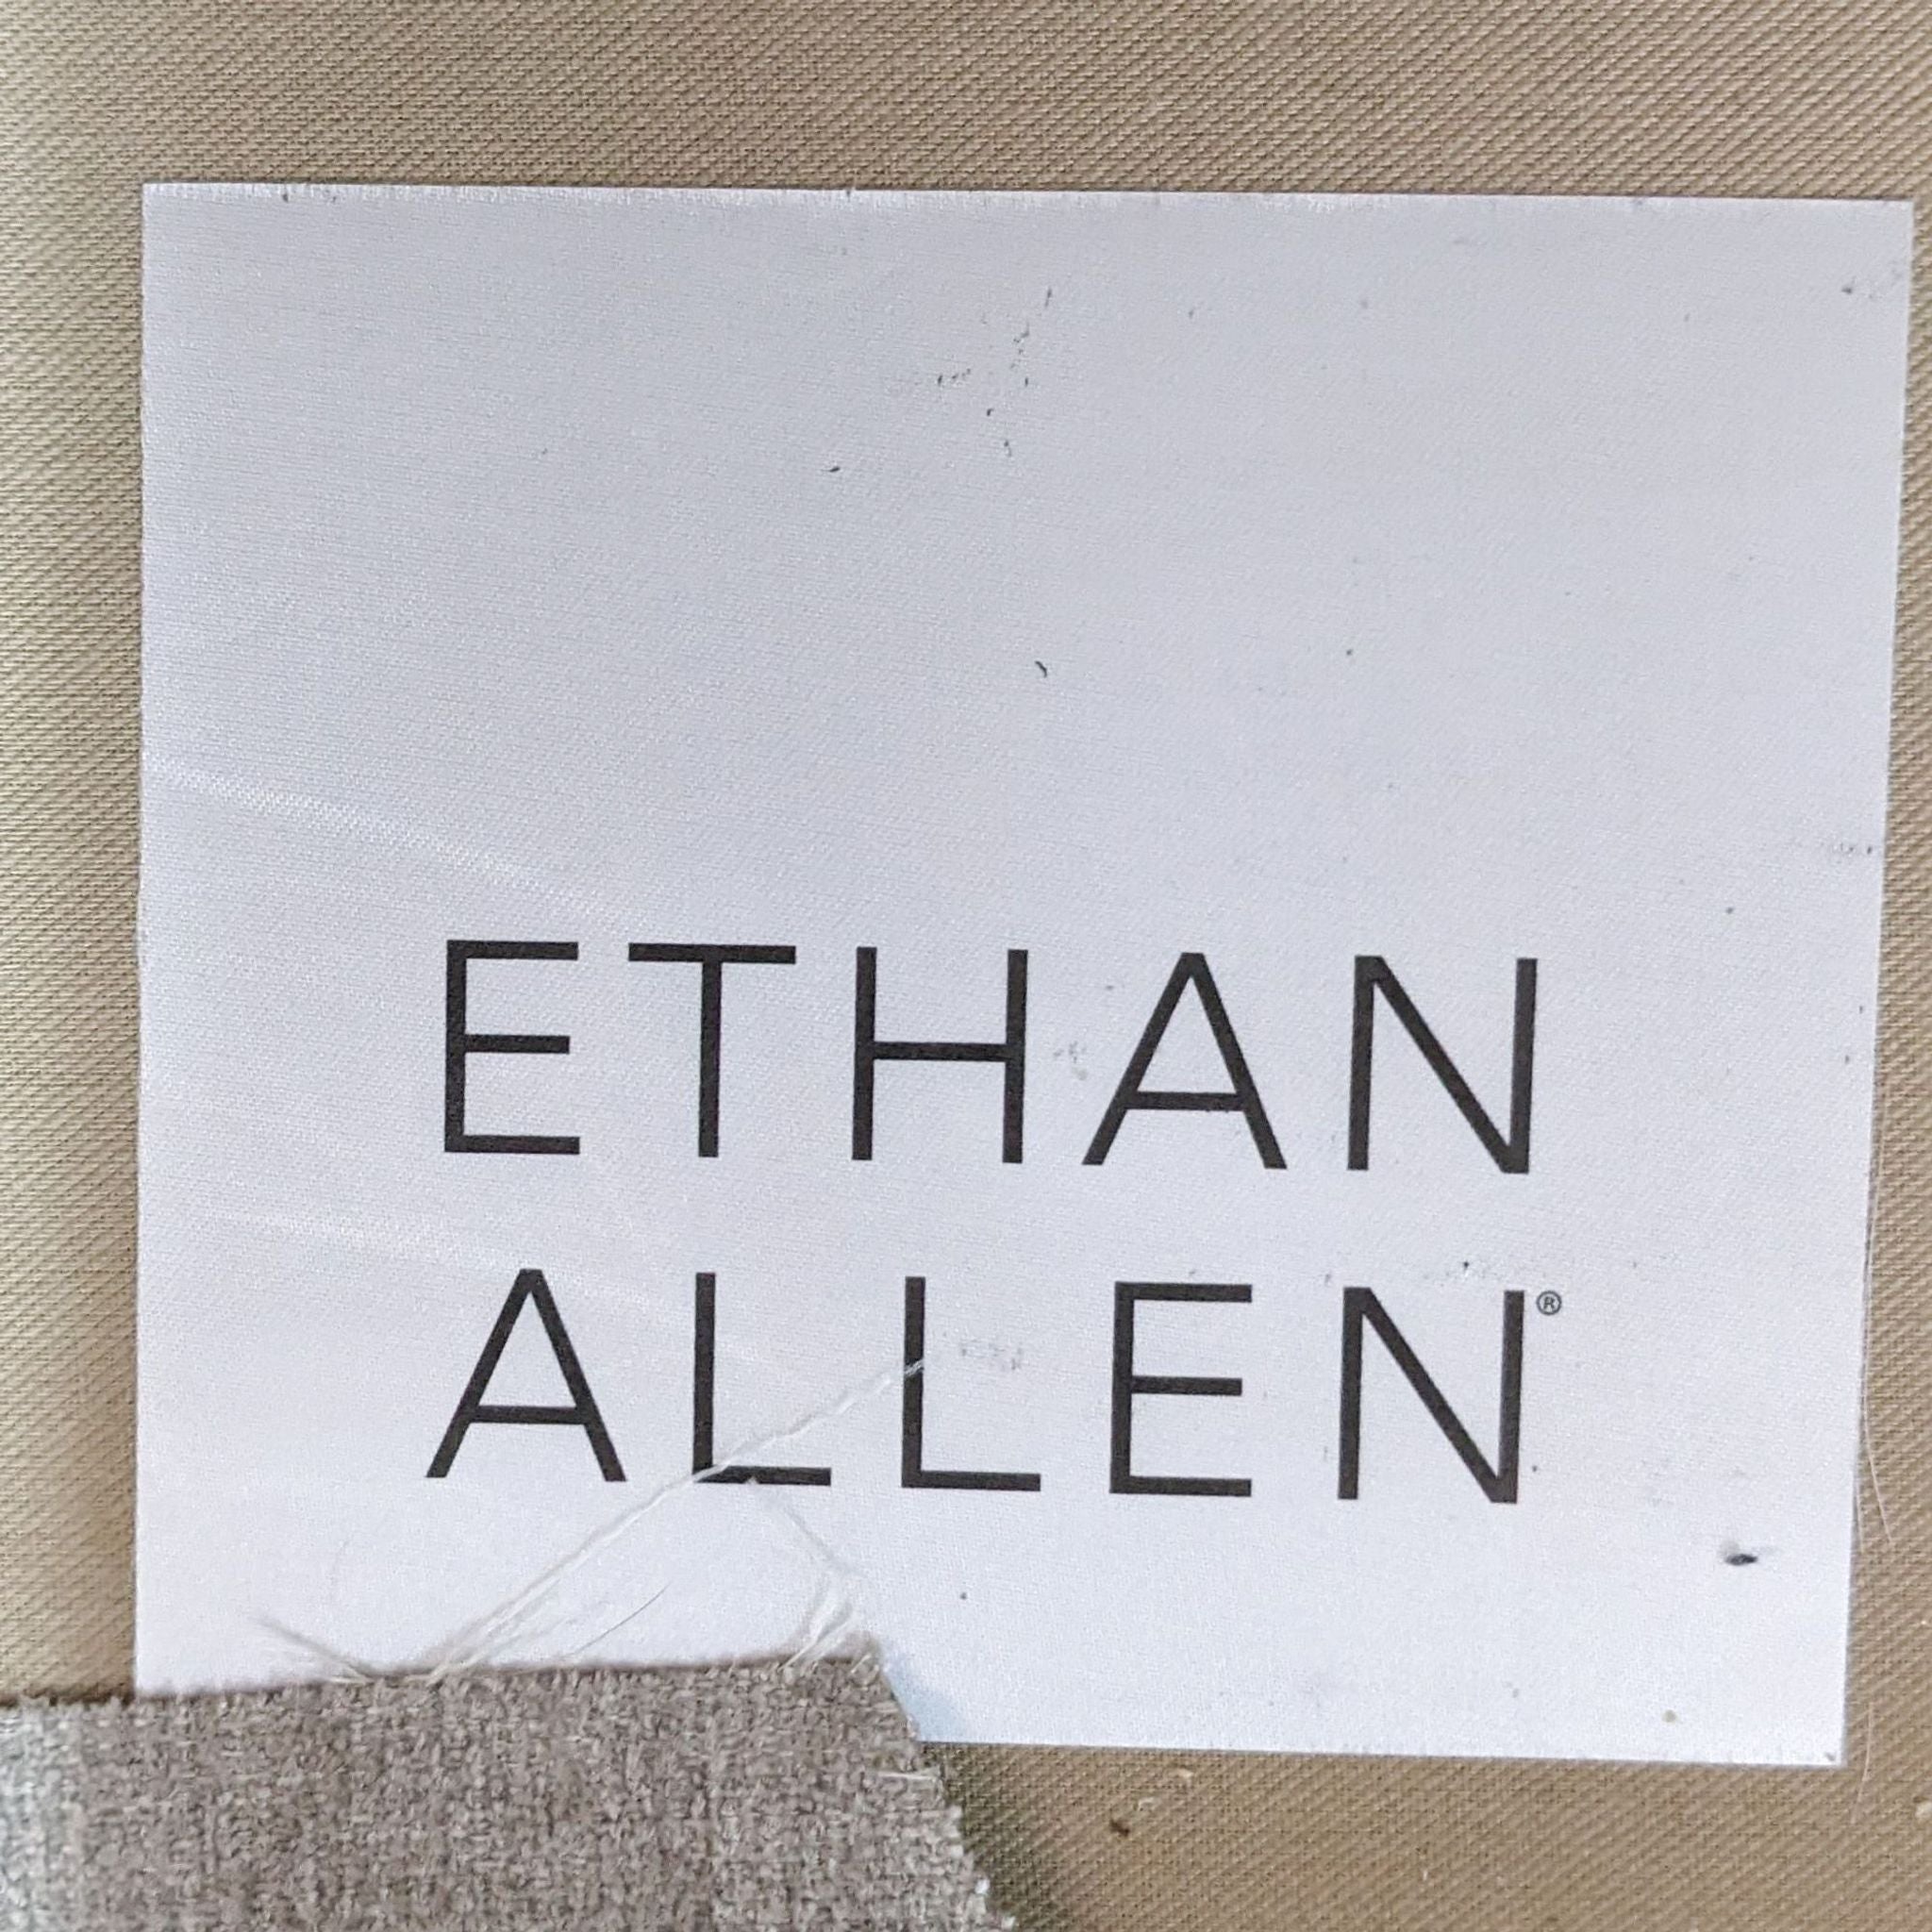 Label showing "ETHAN ALLEN" brand logo on a white background with frayed edges at bottom left.